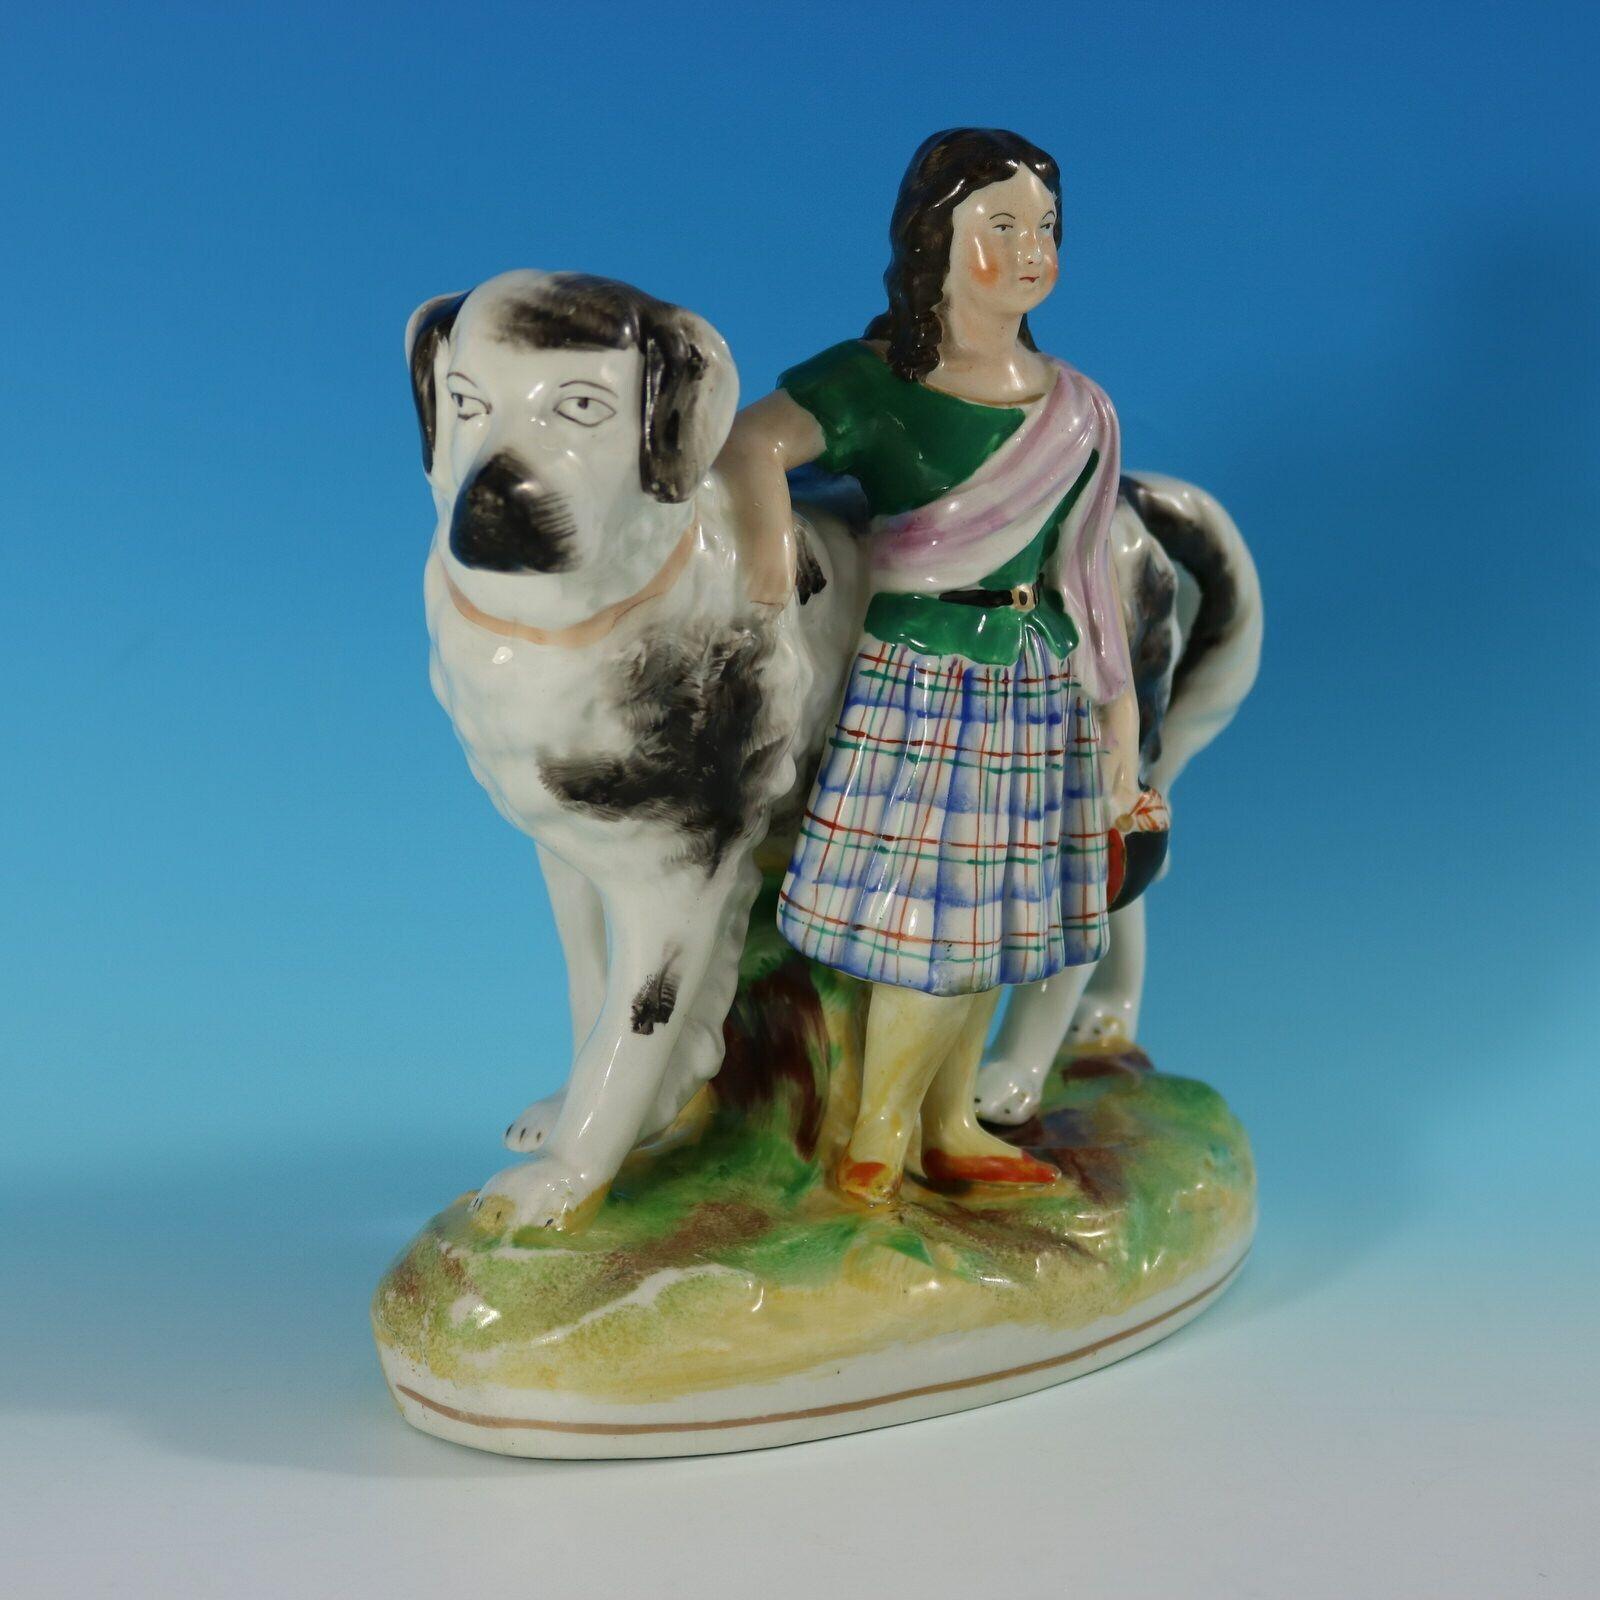 Parr Factory Staffordshire figure with a childhood theme which features the a girl, standing in front of a St. Bernard dog, stood on an oval base. Dull gilt base line and embellishment. Decorated 'in the round' - decoration to front and reverse.